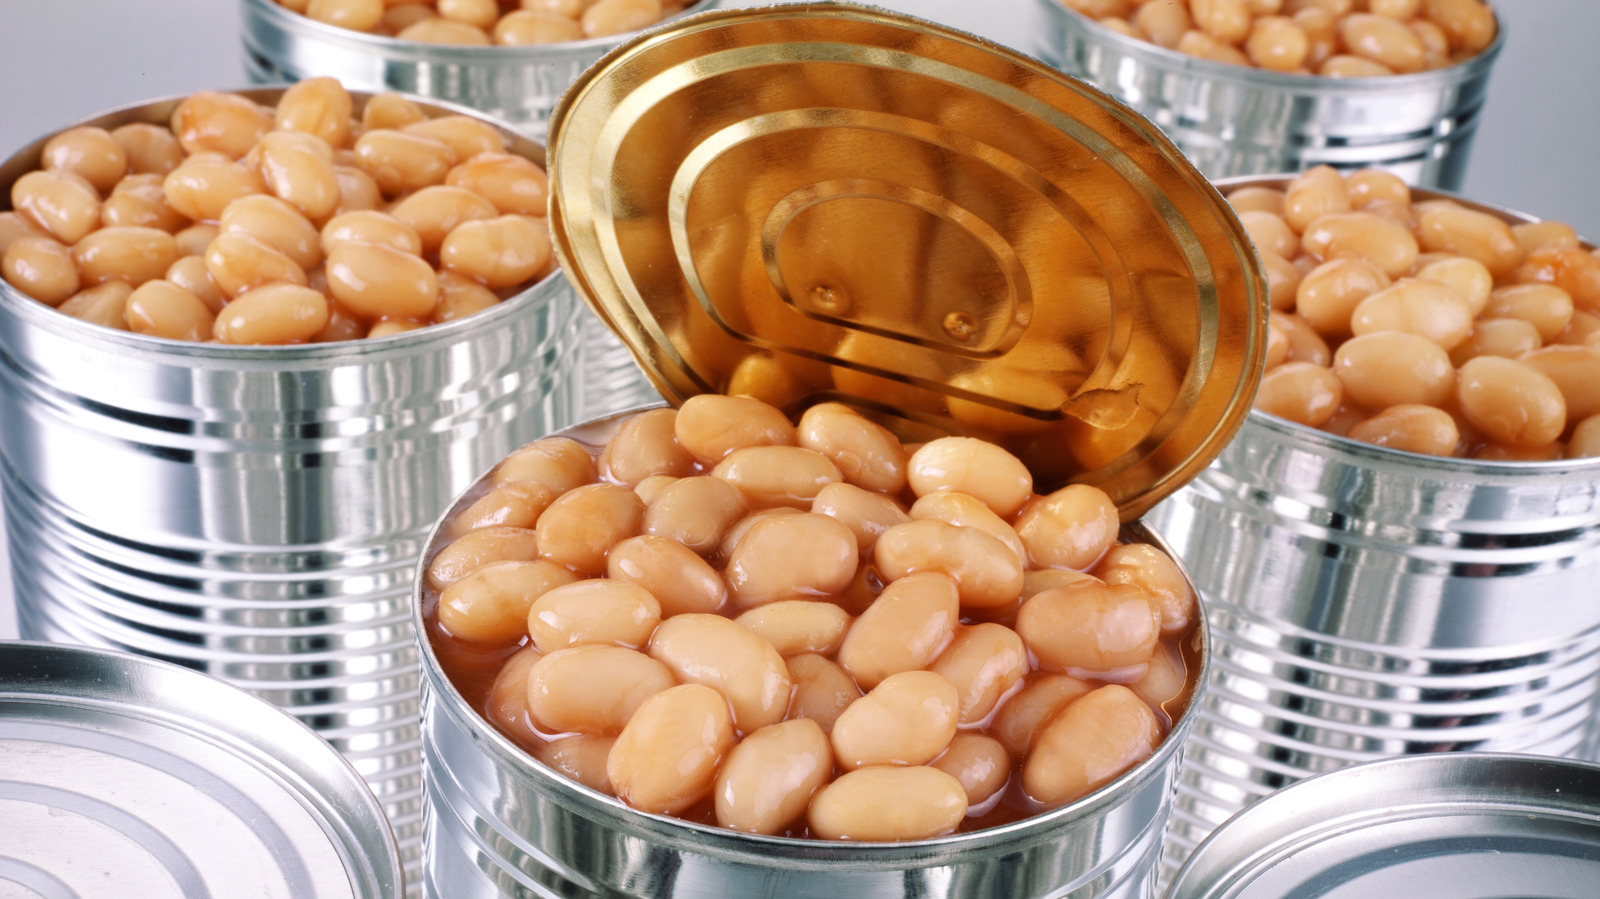 You Should Never Get Rid Of The Liquid From Canned Beans. Here's Why